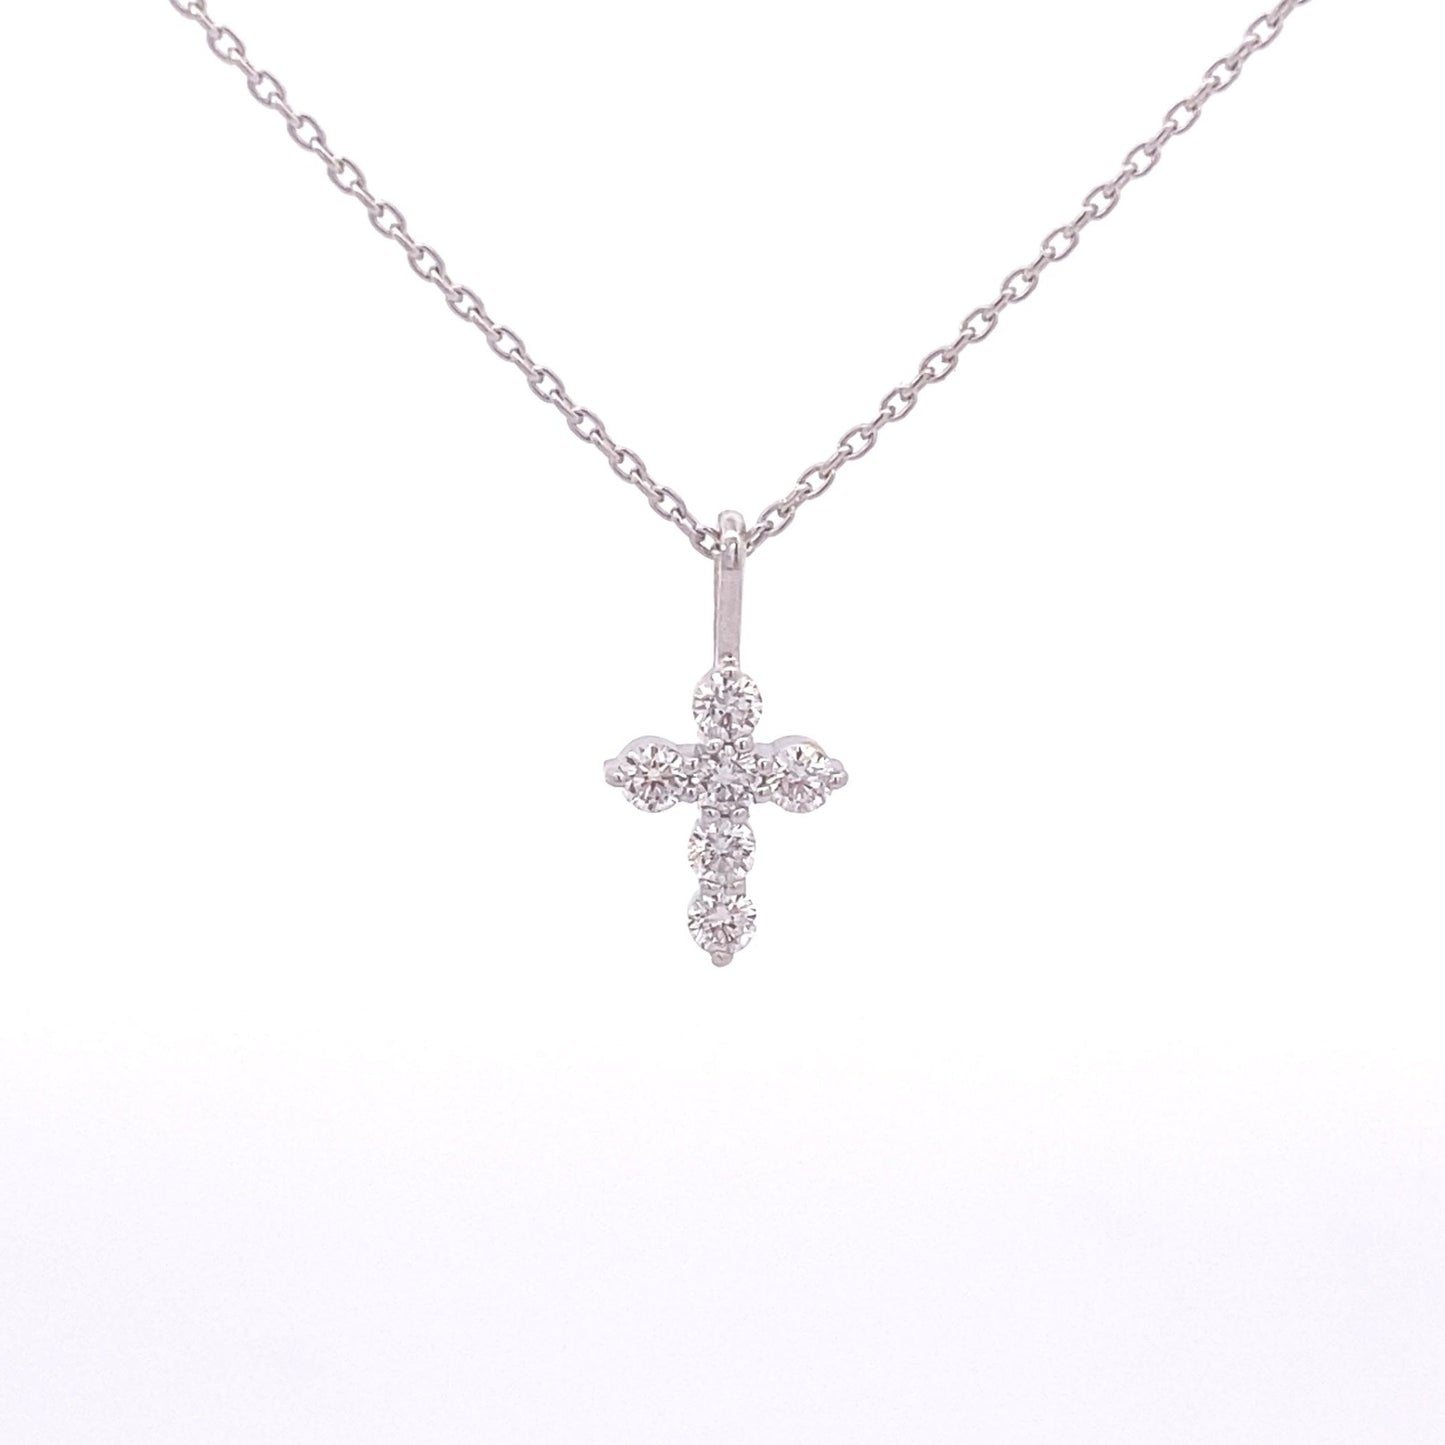 Necklace 14kt white gold Diamond Cross Necklace with 18" cable chain - Gaines Jewelers